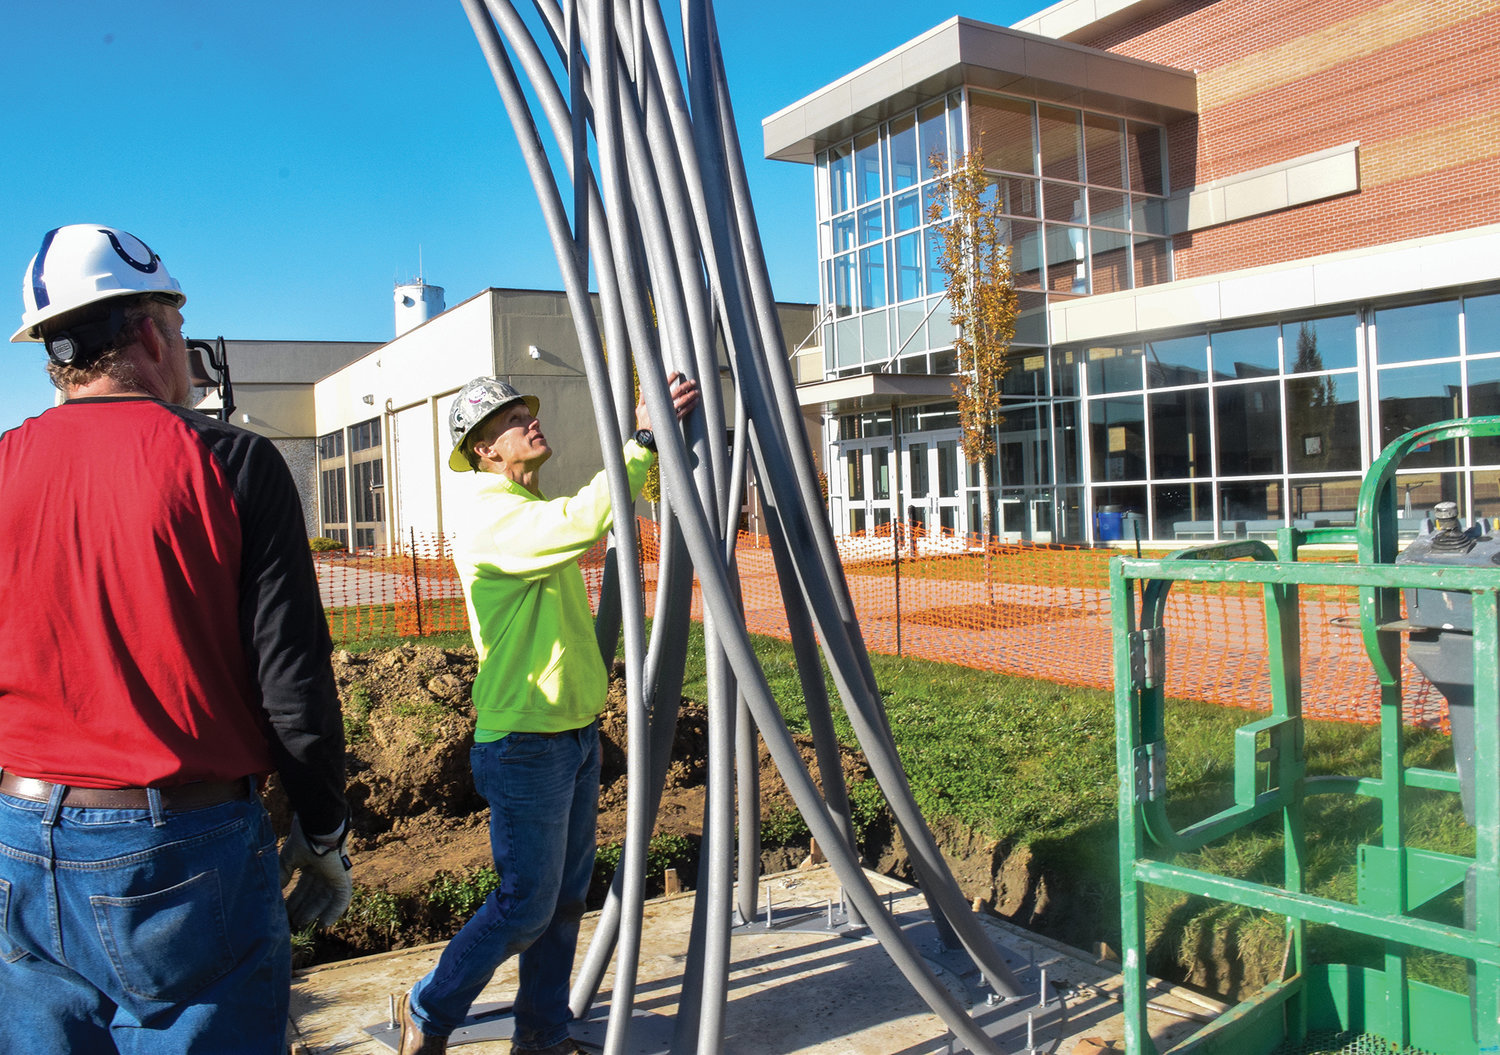 Battle Ground artist Curtis Pittman, right, inspects his latest work, as his fabricator and father-in-law Harold Combs, looks on at Ridgefield High School on Nov. 16.